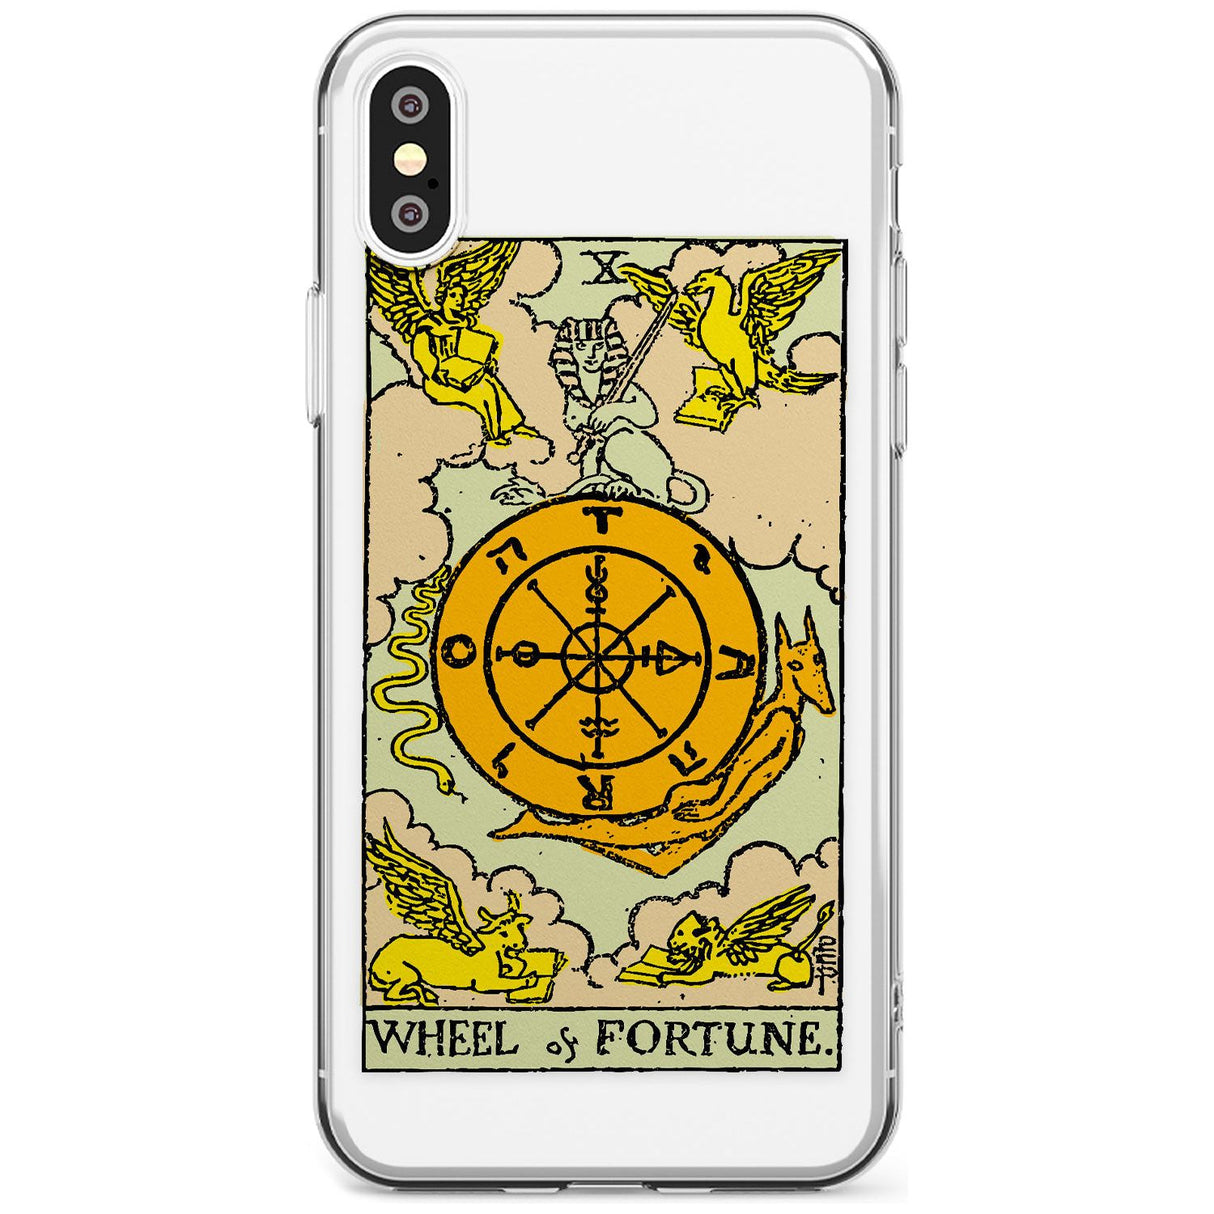 Wheel of Fortune Tarot Card - Colour Black Impact Phone Case for iPhone X XS Max XR